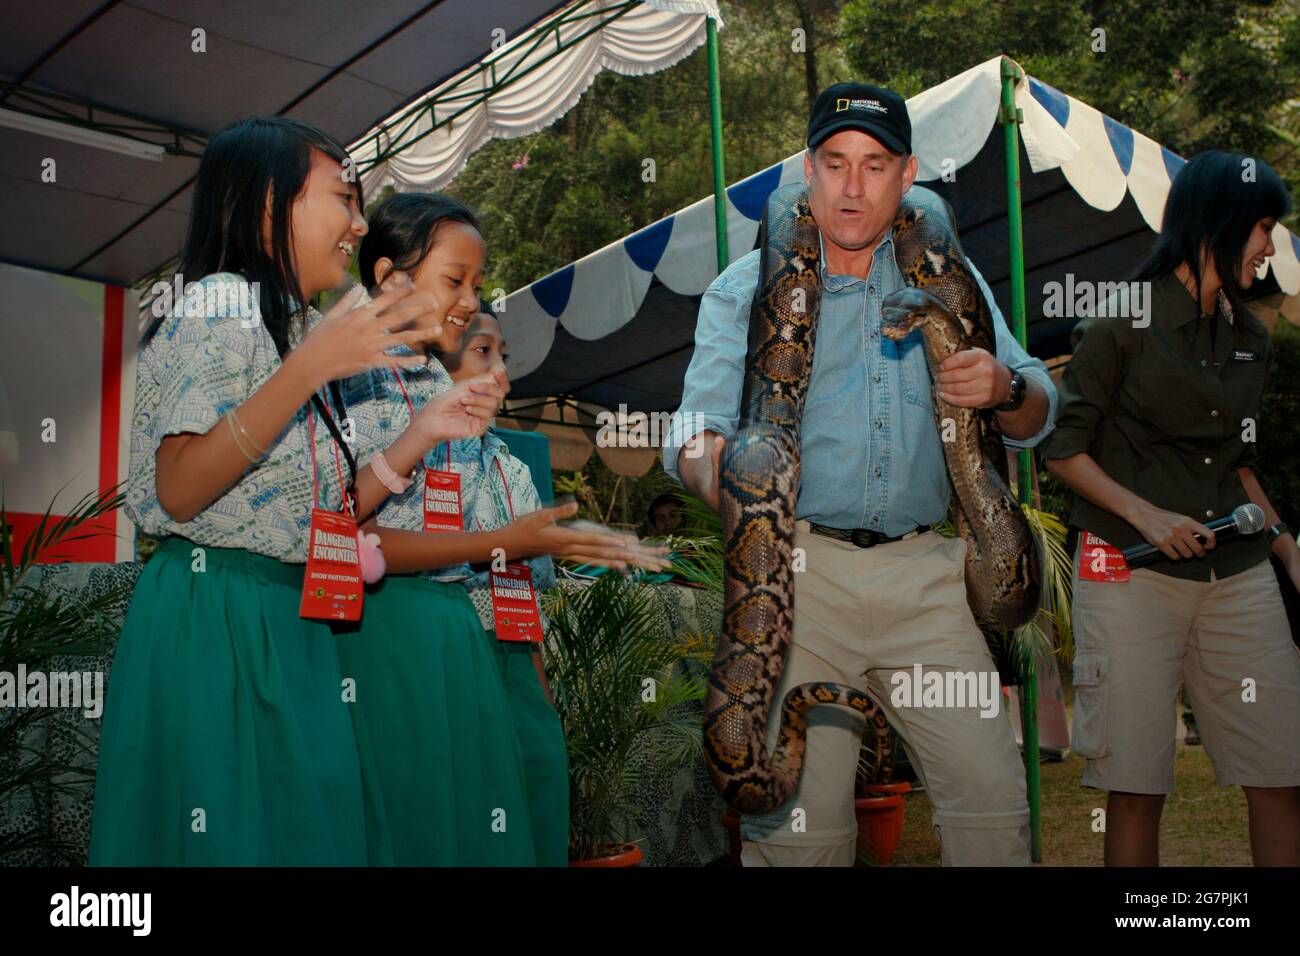 Bogor, West Java, Indonesia. 26th July 2006. Herpetologist Brady Barr during an event to promote 'Dangerous Encounters: Brady's Croc Adventure', an educational TV program aired on National Geographic Channel. The event is held at Taman Safari Indonesia in Cisarua, Bogor, West Java, Indonesia. Stock Photo